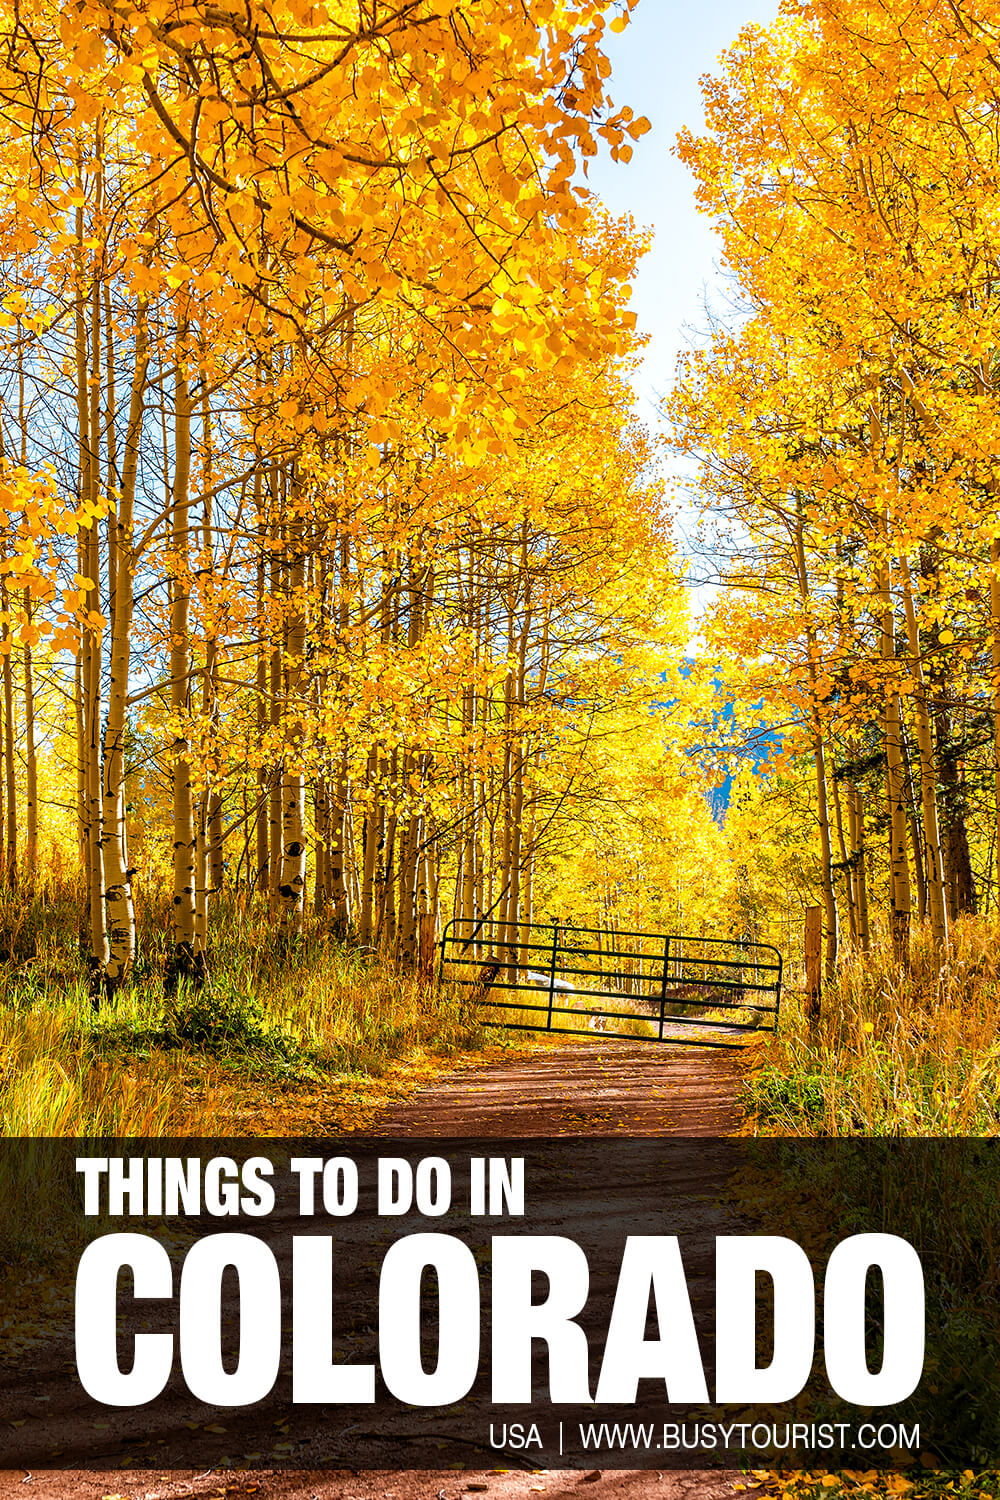 51 Fun Things To Do & Places To Visit In Colorado - Attractions ...